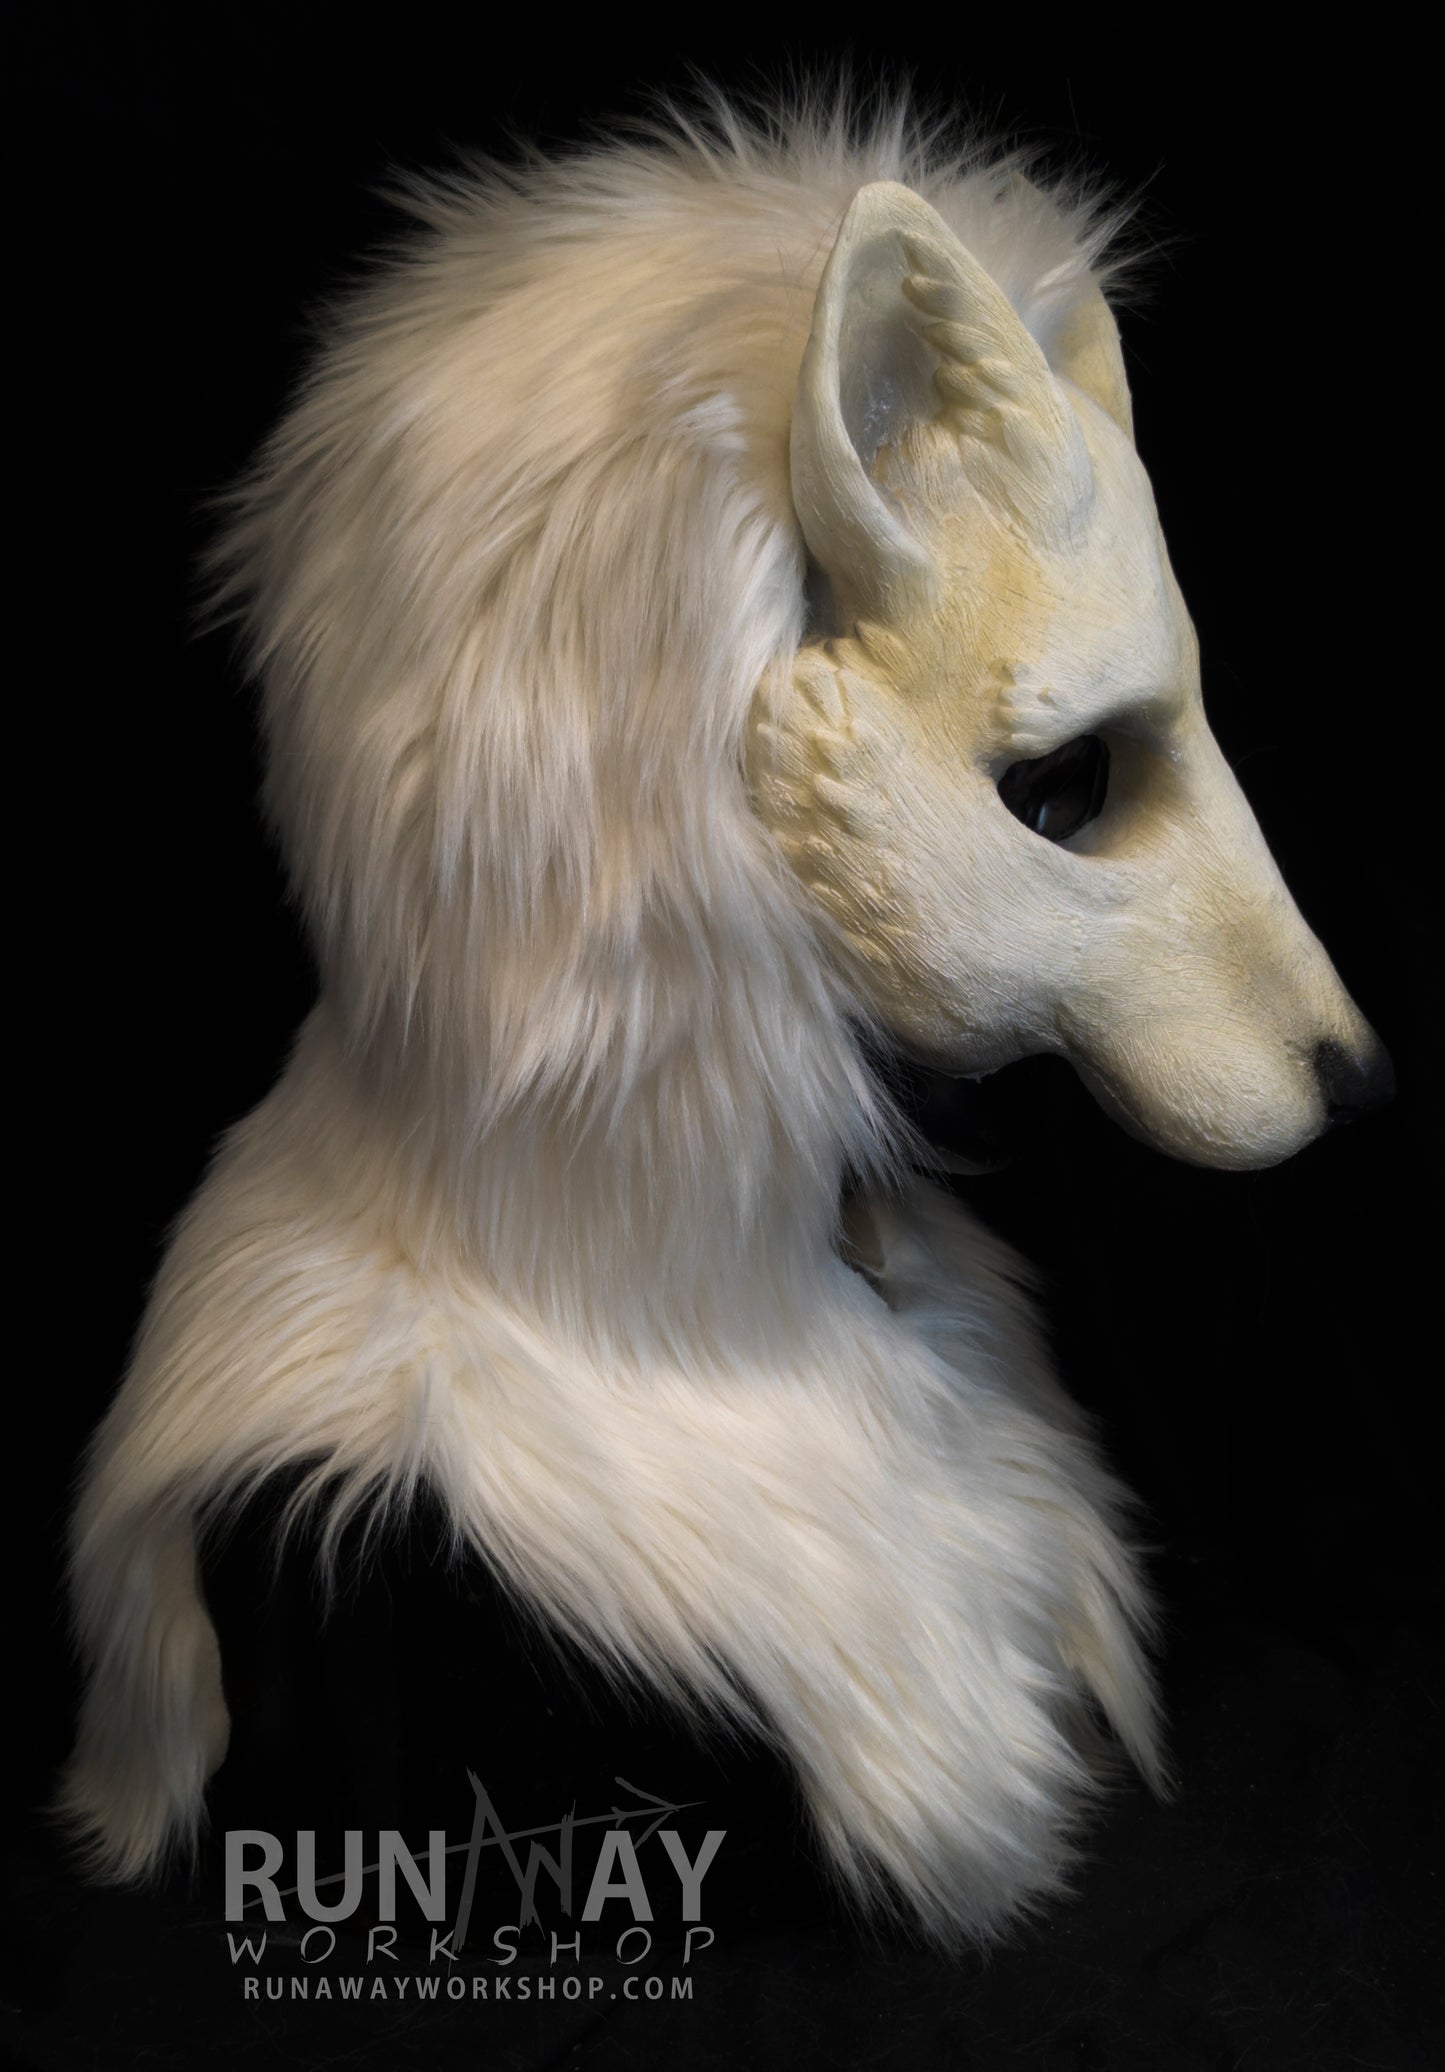 White fox durable hooded mask for LARP, performance and costuming